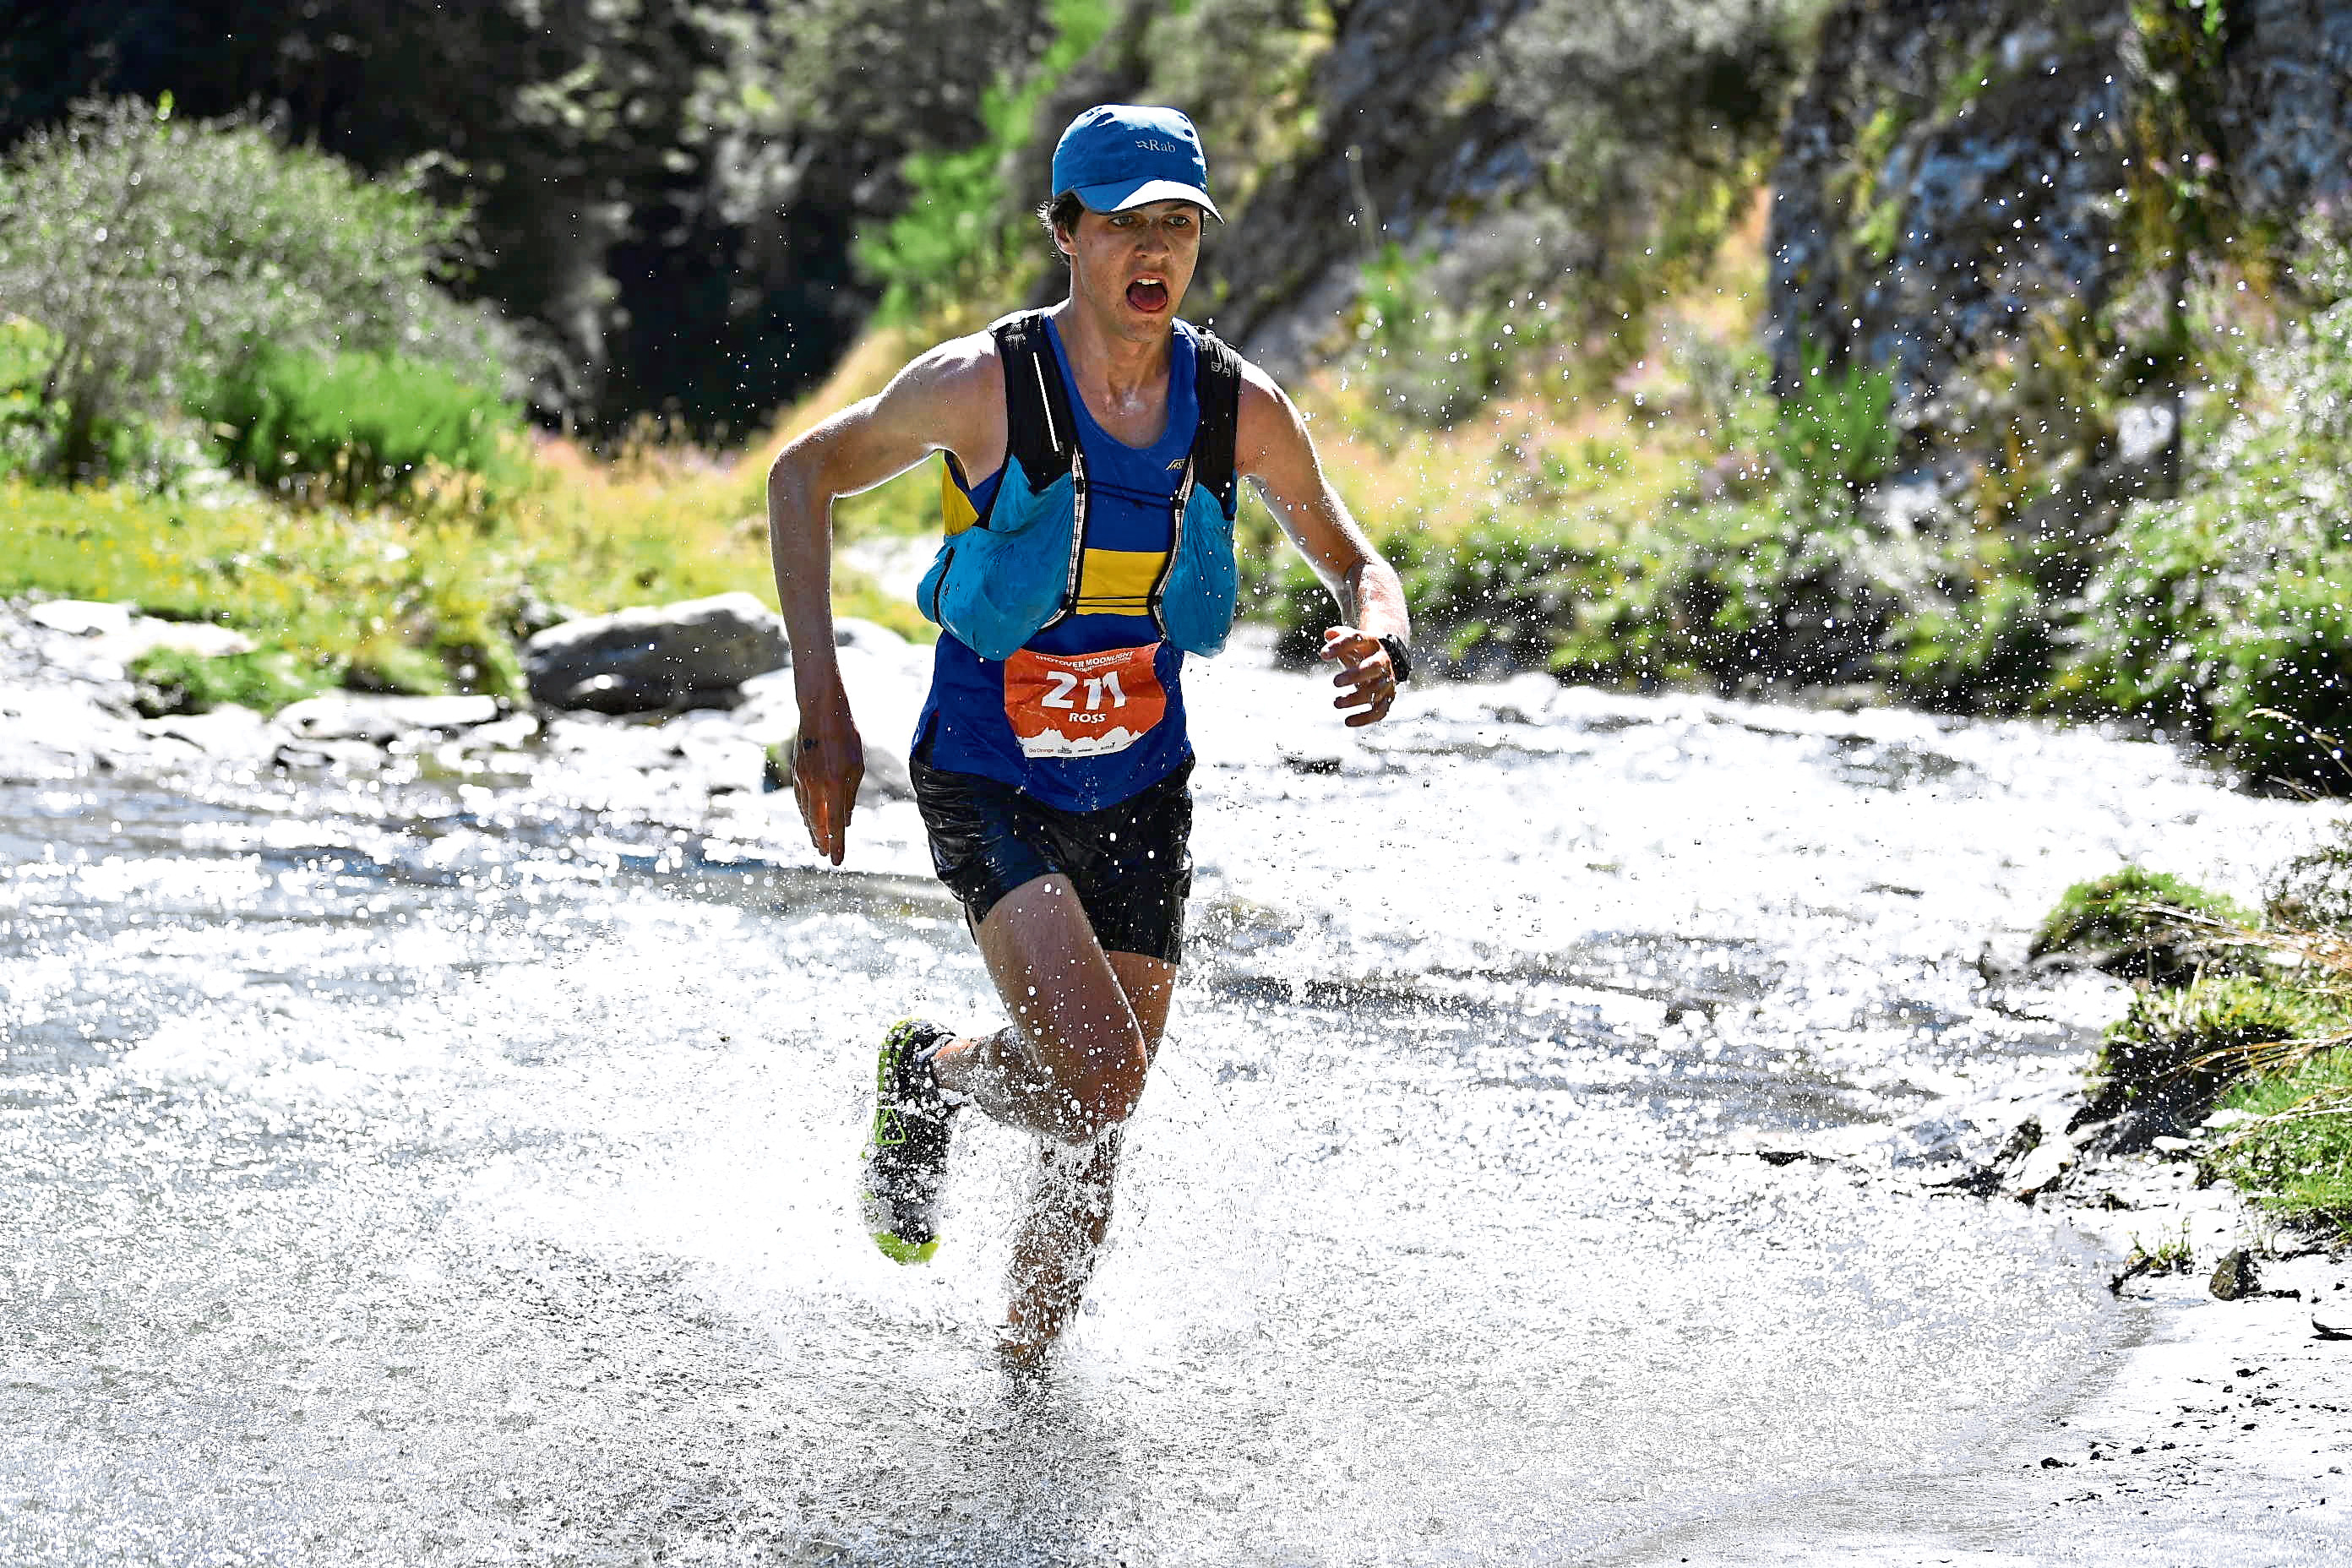 Ross Gollan photos at the Shotover Moonlight mountain marathon - please credit Dom Channon Photography